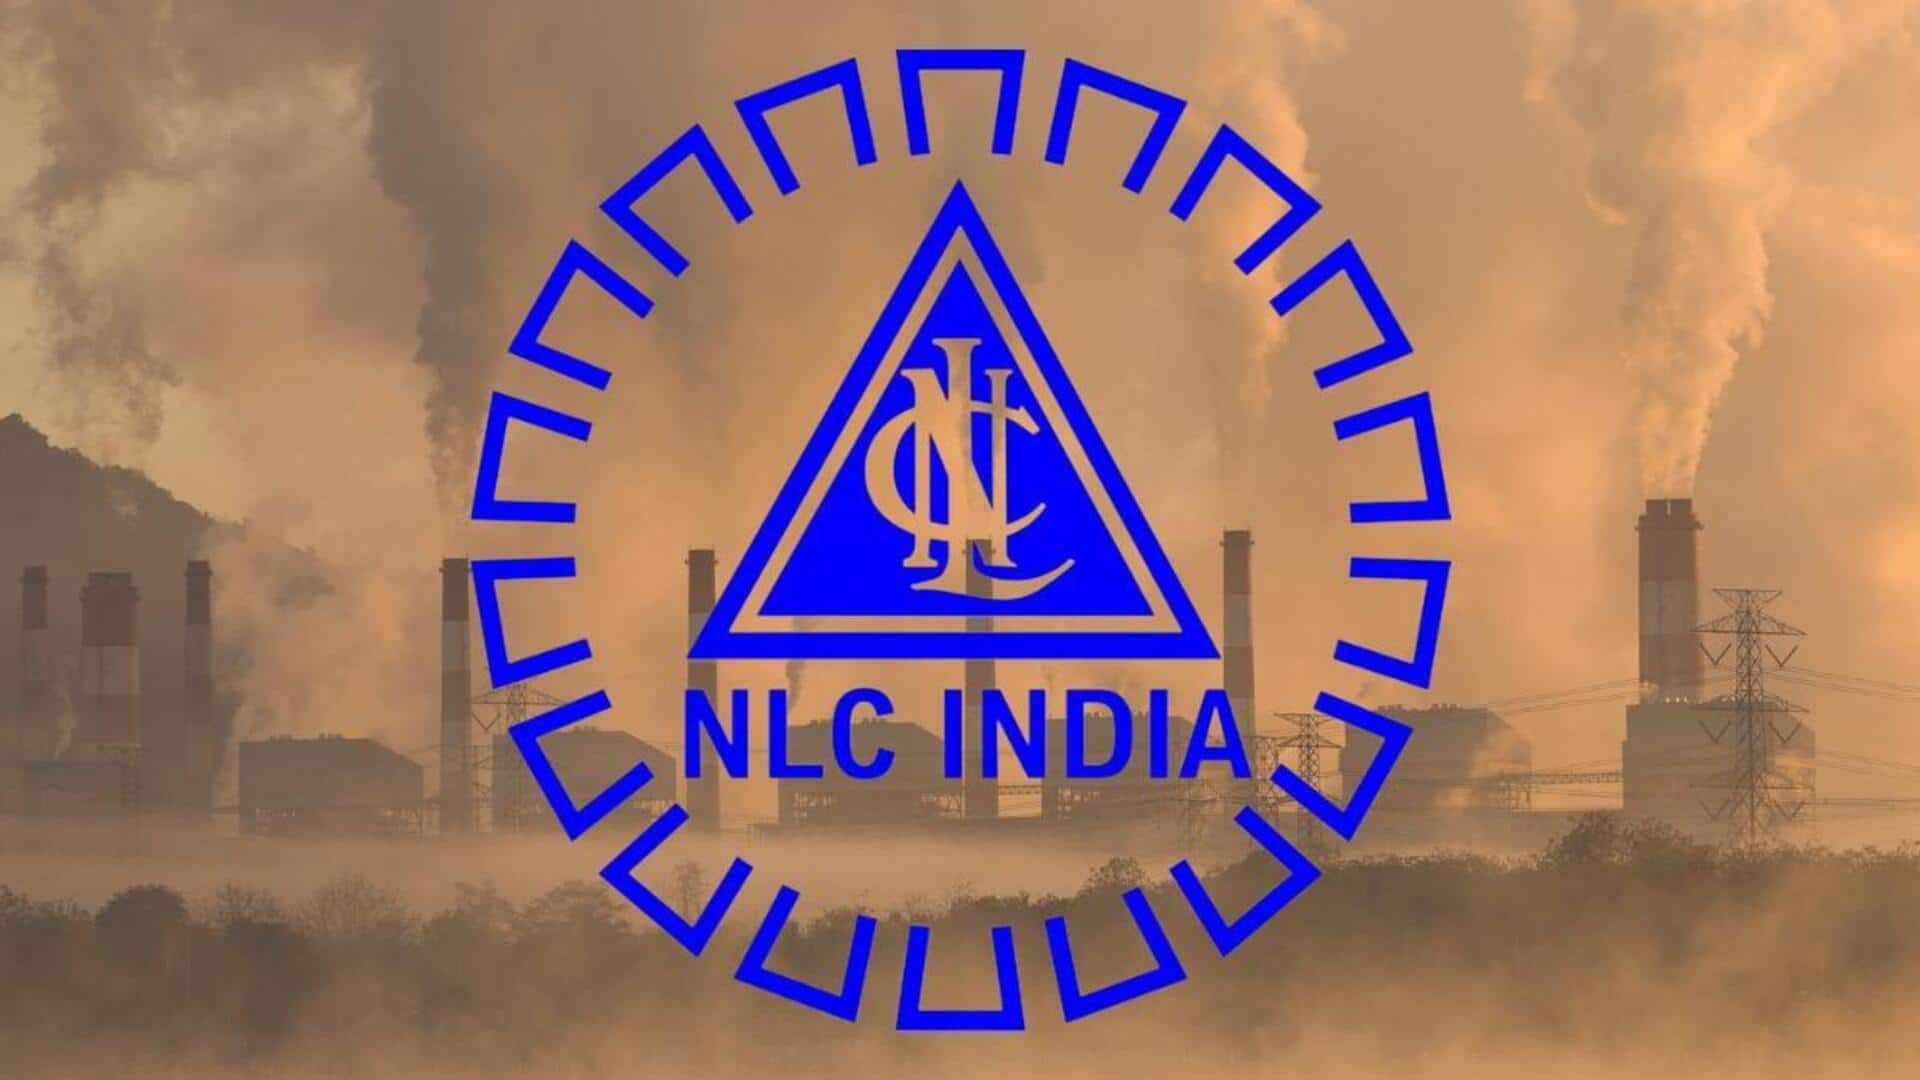 Centre to raise Rs. 2,200cr by offloading NLC India stake